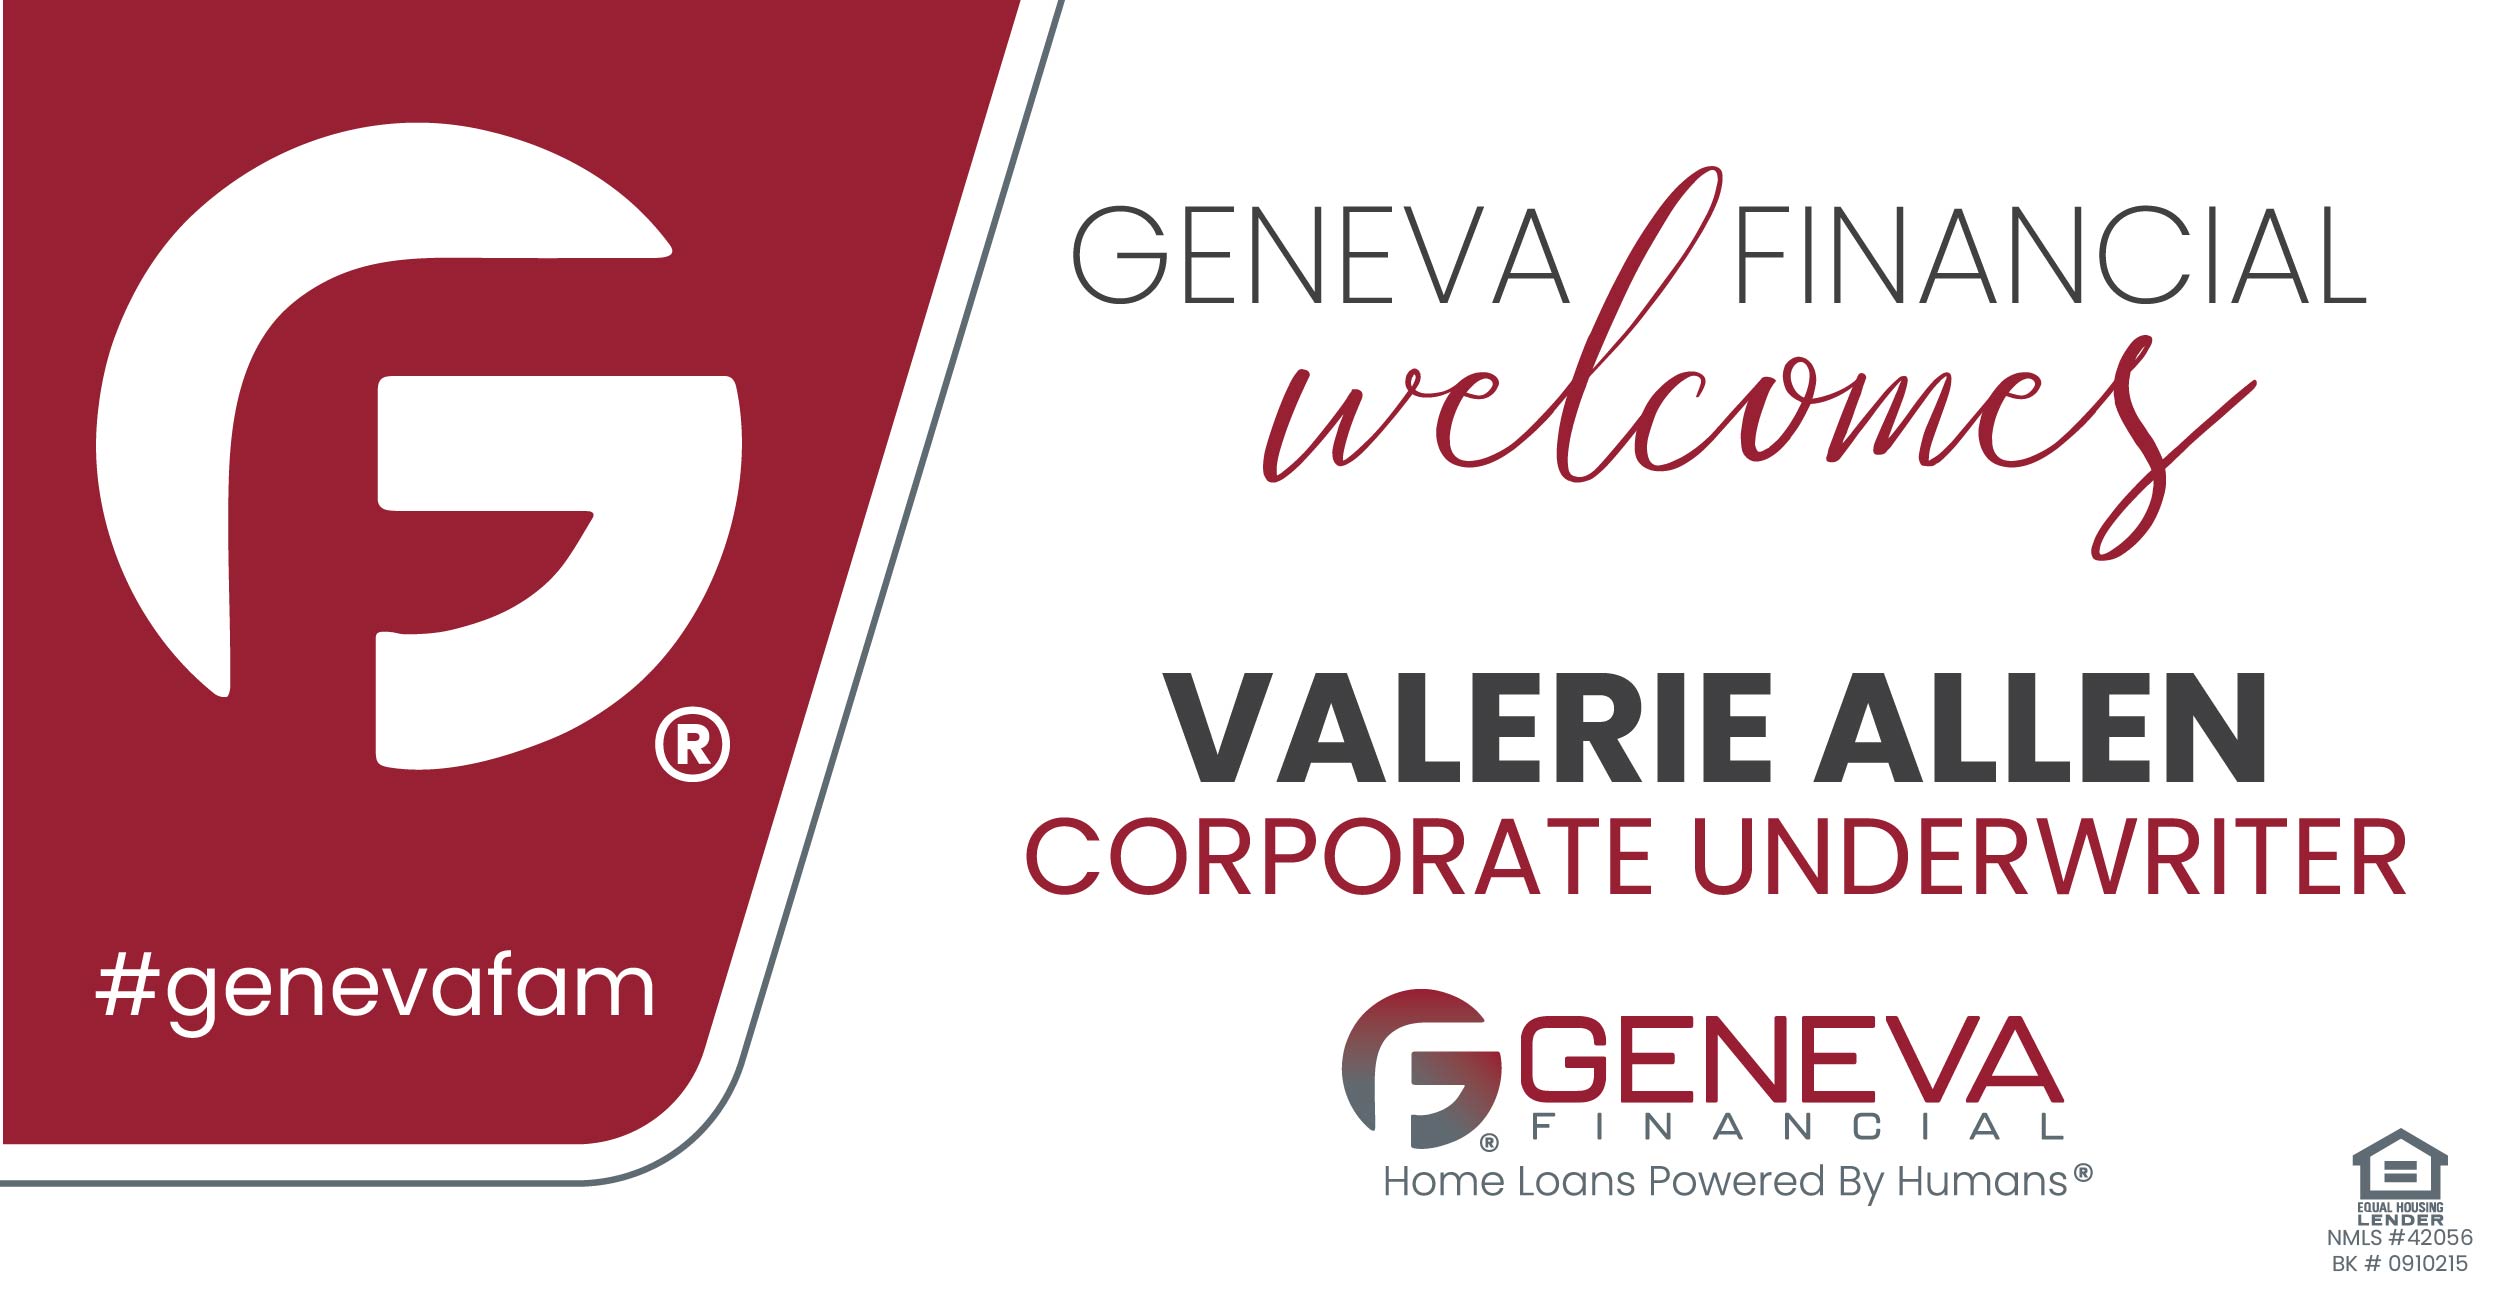 Geneva Financial Welcomes New Underwriter Valerie Allen to Geneva Corporate – Home Loans Powered by Humans®.